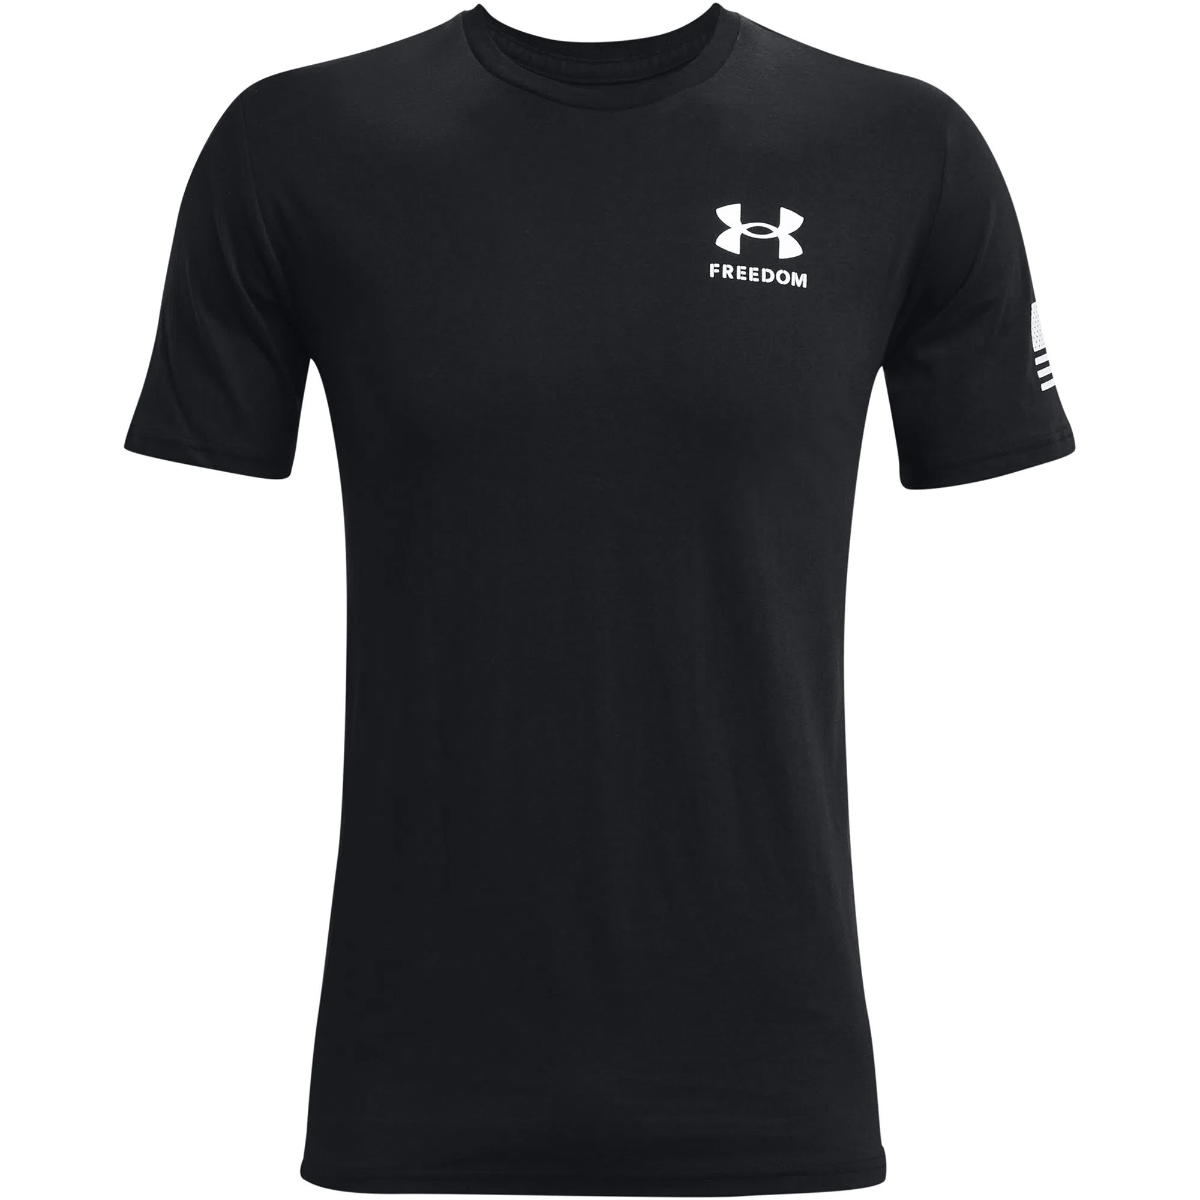  Under Armour Mens Standard New Freedom Flag T-Shirt